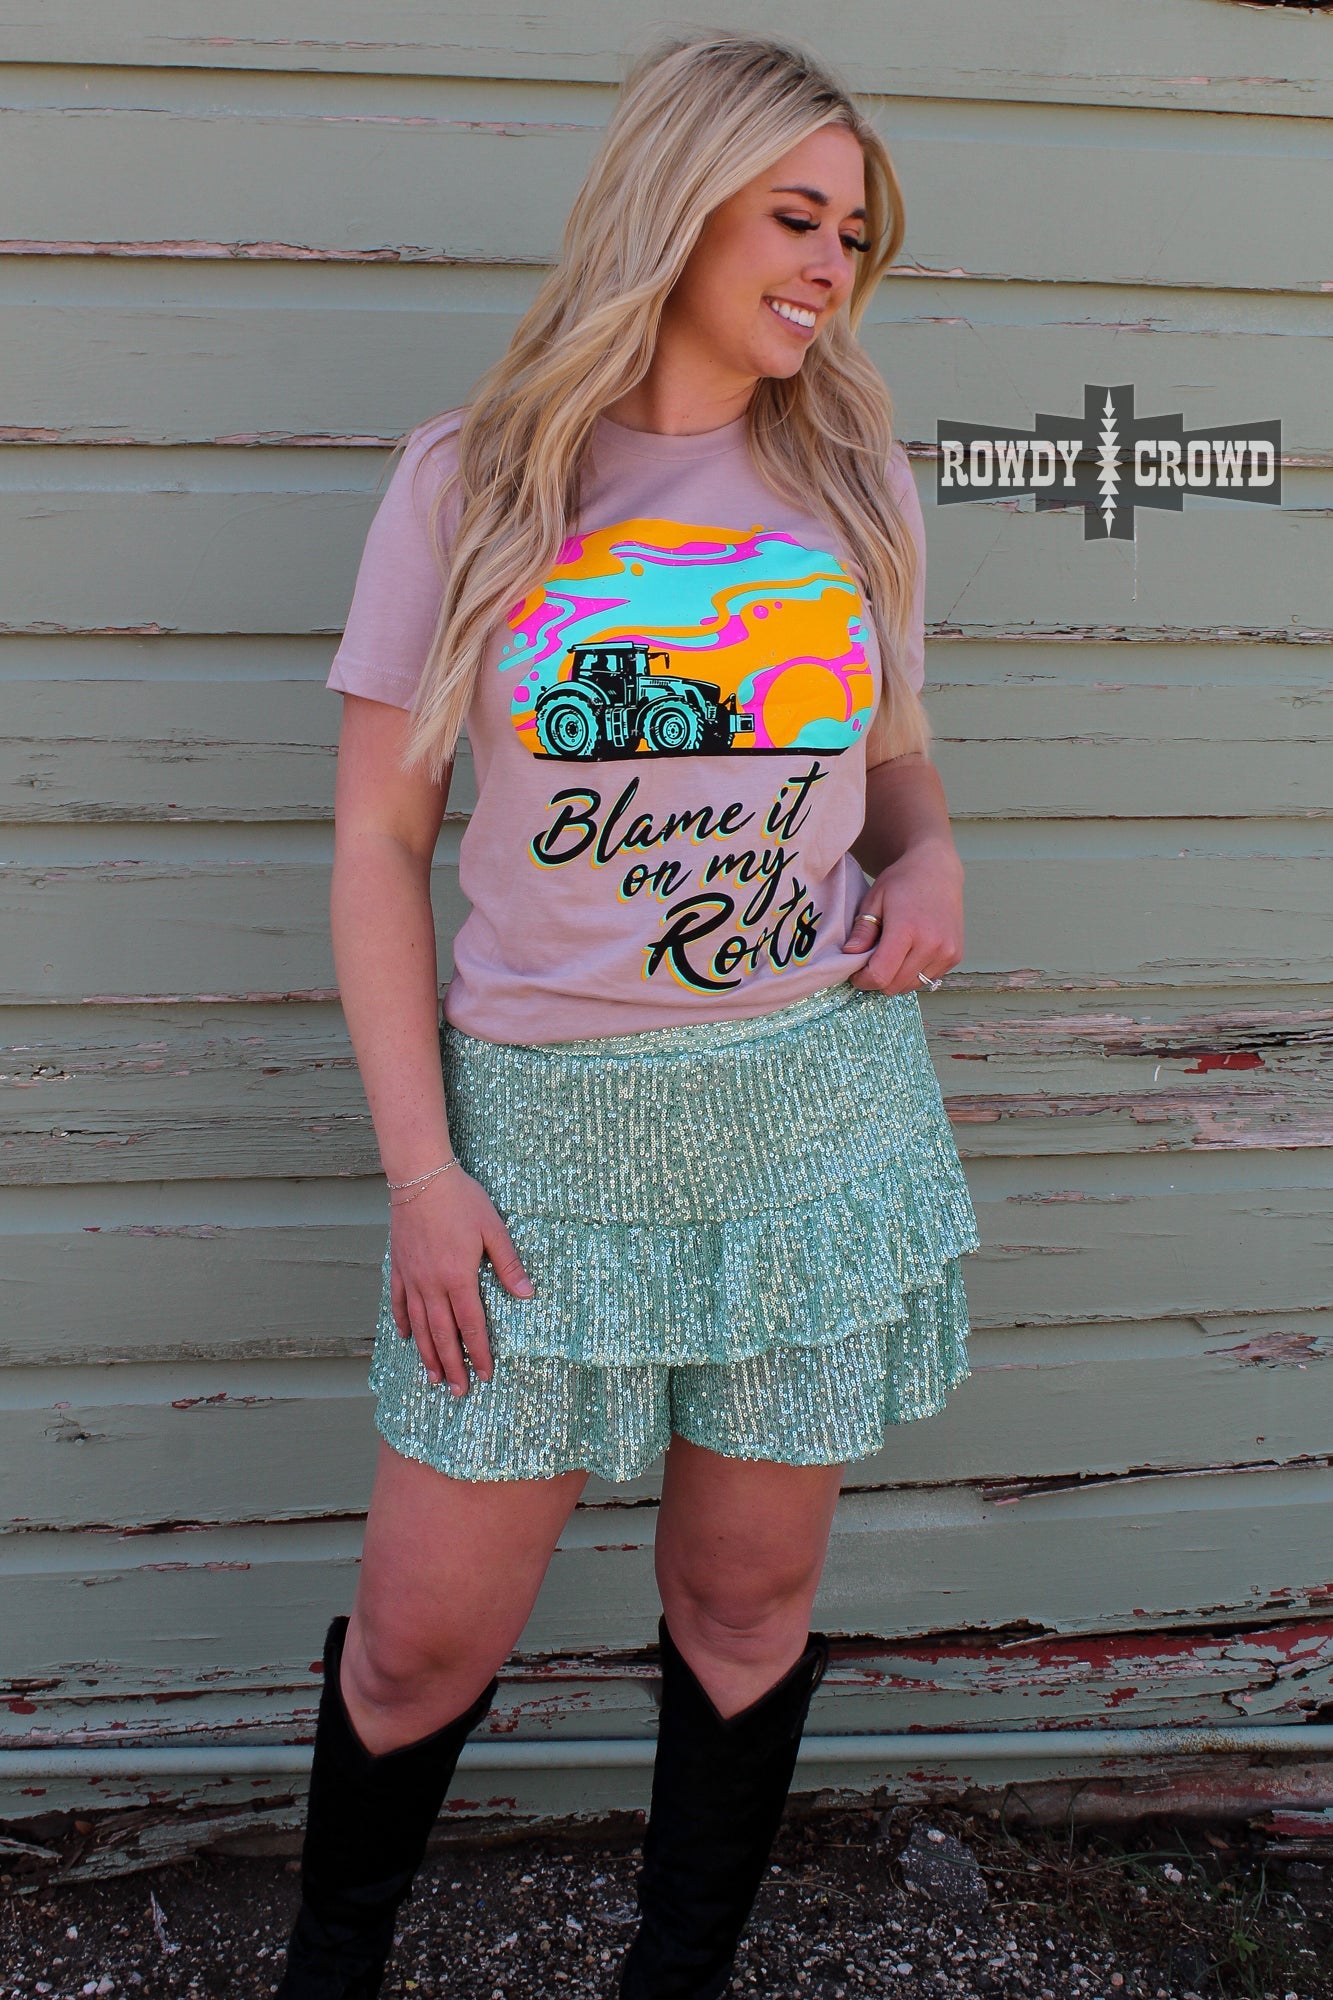 western apparel, western graphic tee, graphic western tees, wholesale clothing, western wholesale, women's western graphic tees, wholesale clothing and jewelry, western boutique clothing, western women's graphic tee, blame it on my roots tee, farming tee, women's farming tee, women's western tee, women's tractor tee